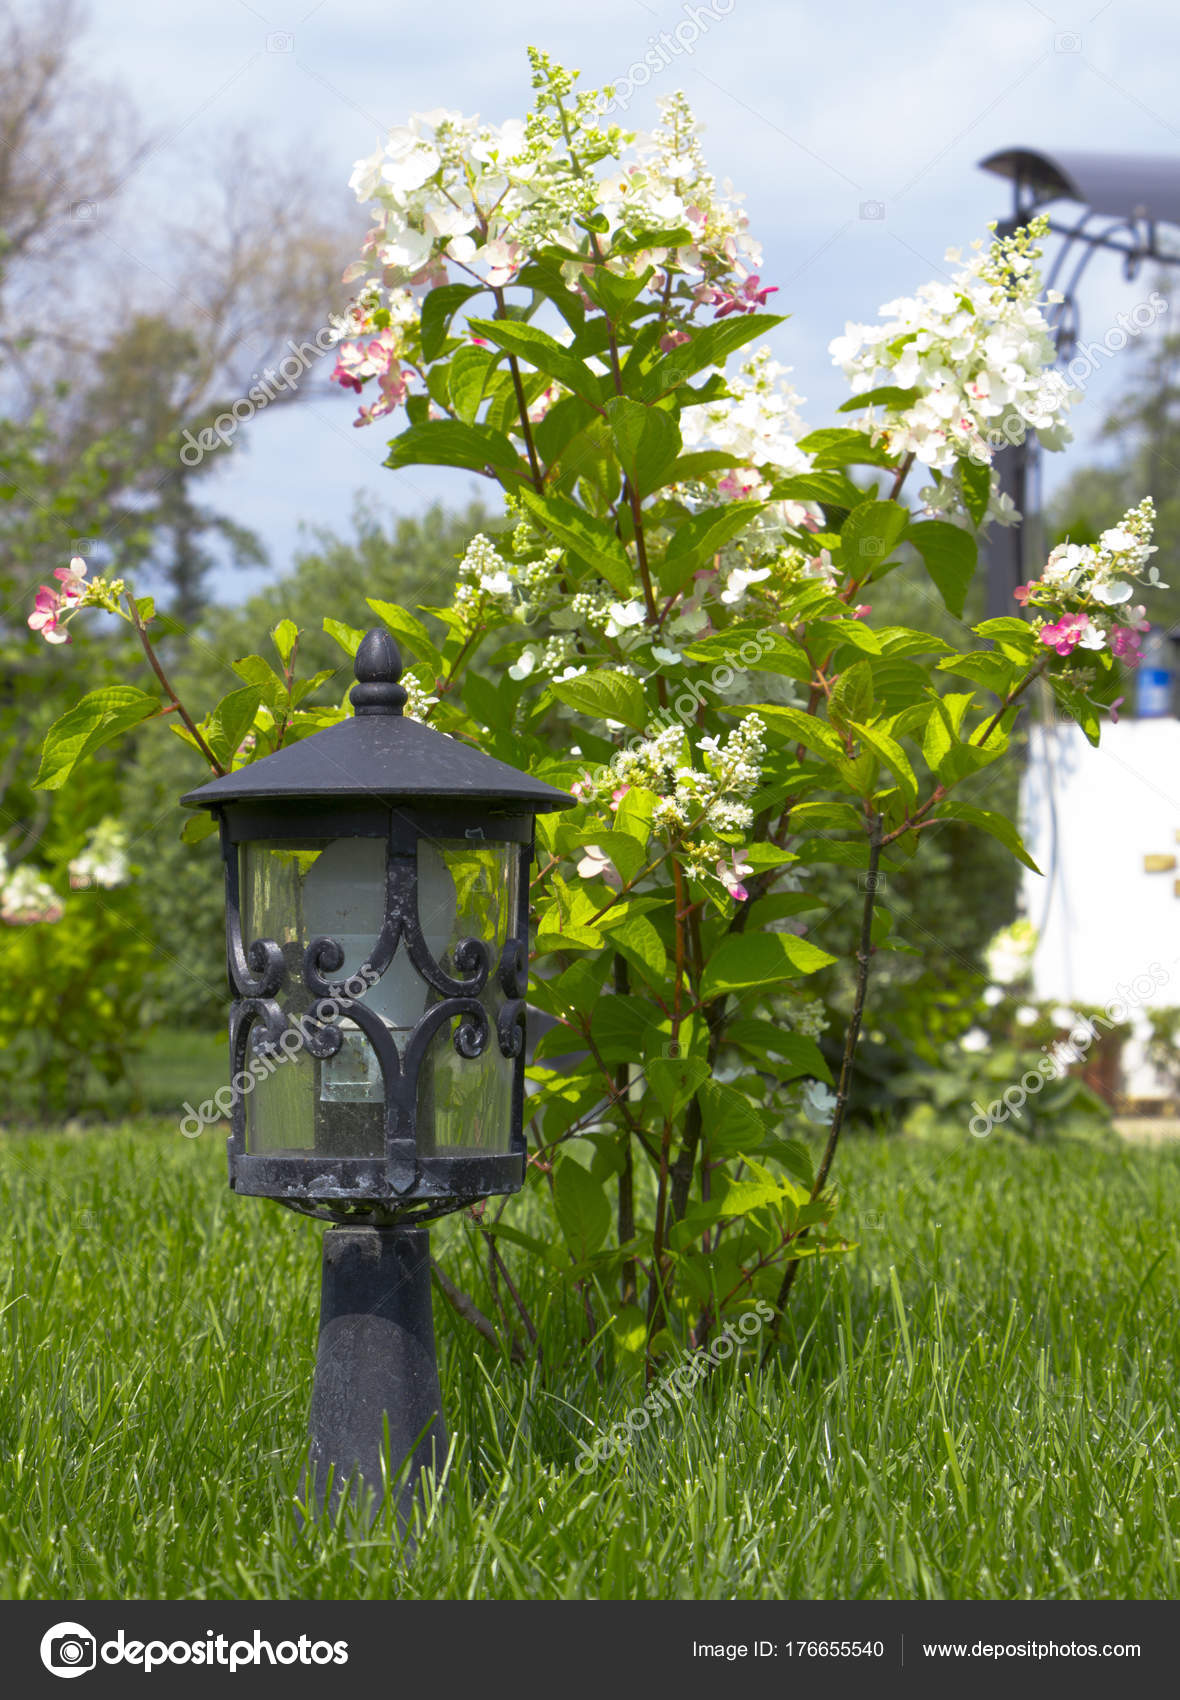 garden lamp, made in the Middle Ages, on a lawn with a juicy green ...